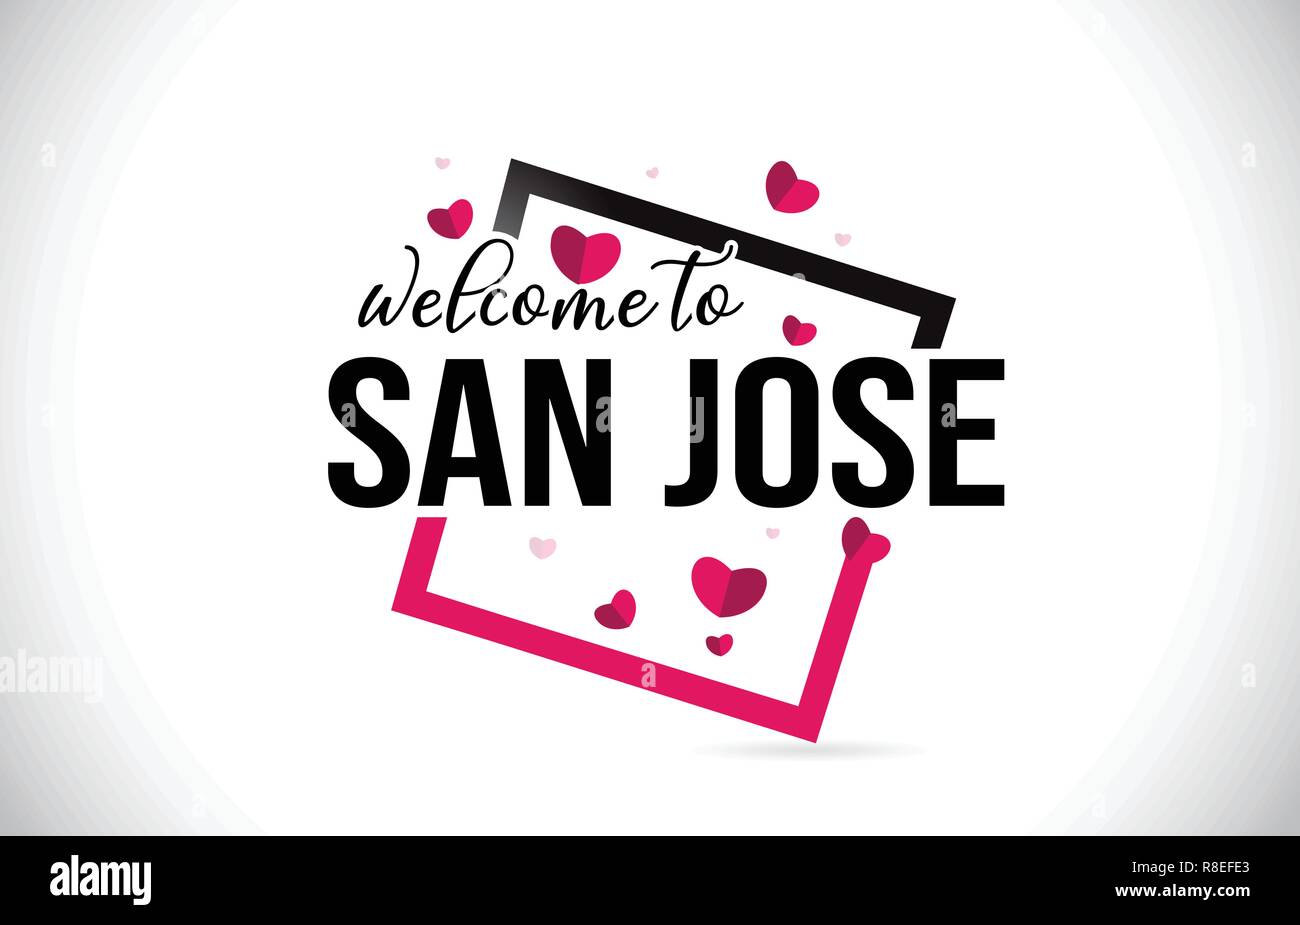 San Jose Welcome To Word Text with Handwritten Font and  Red Hearts Square Design Illustration Vector. Stock Vector